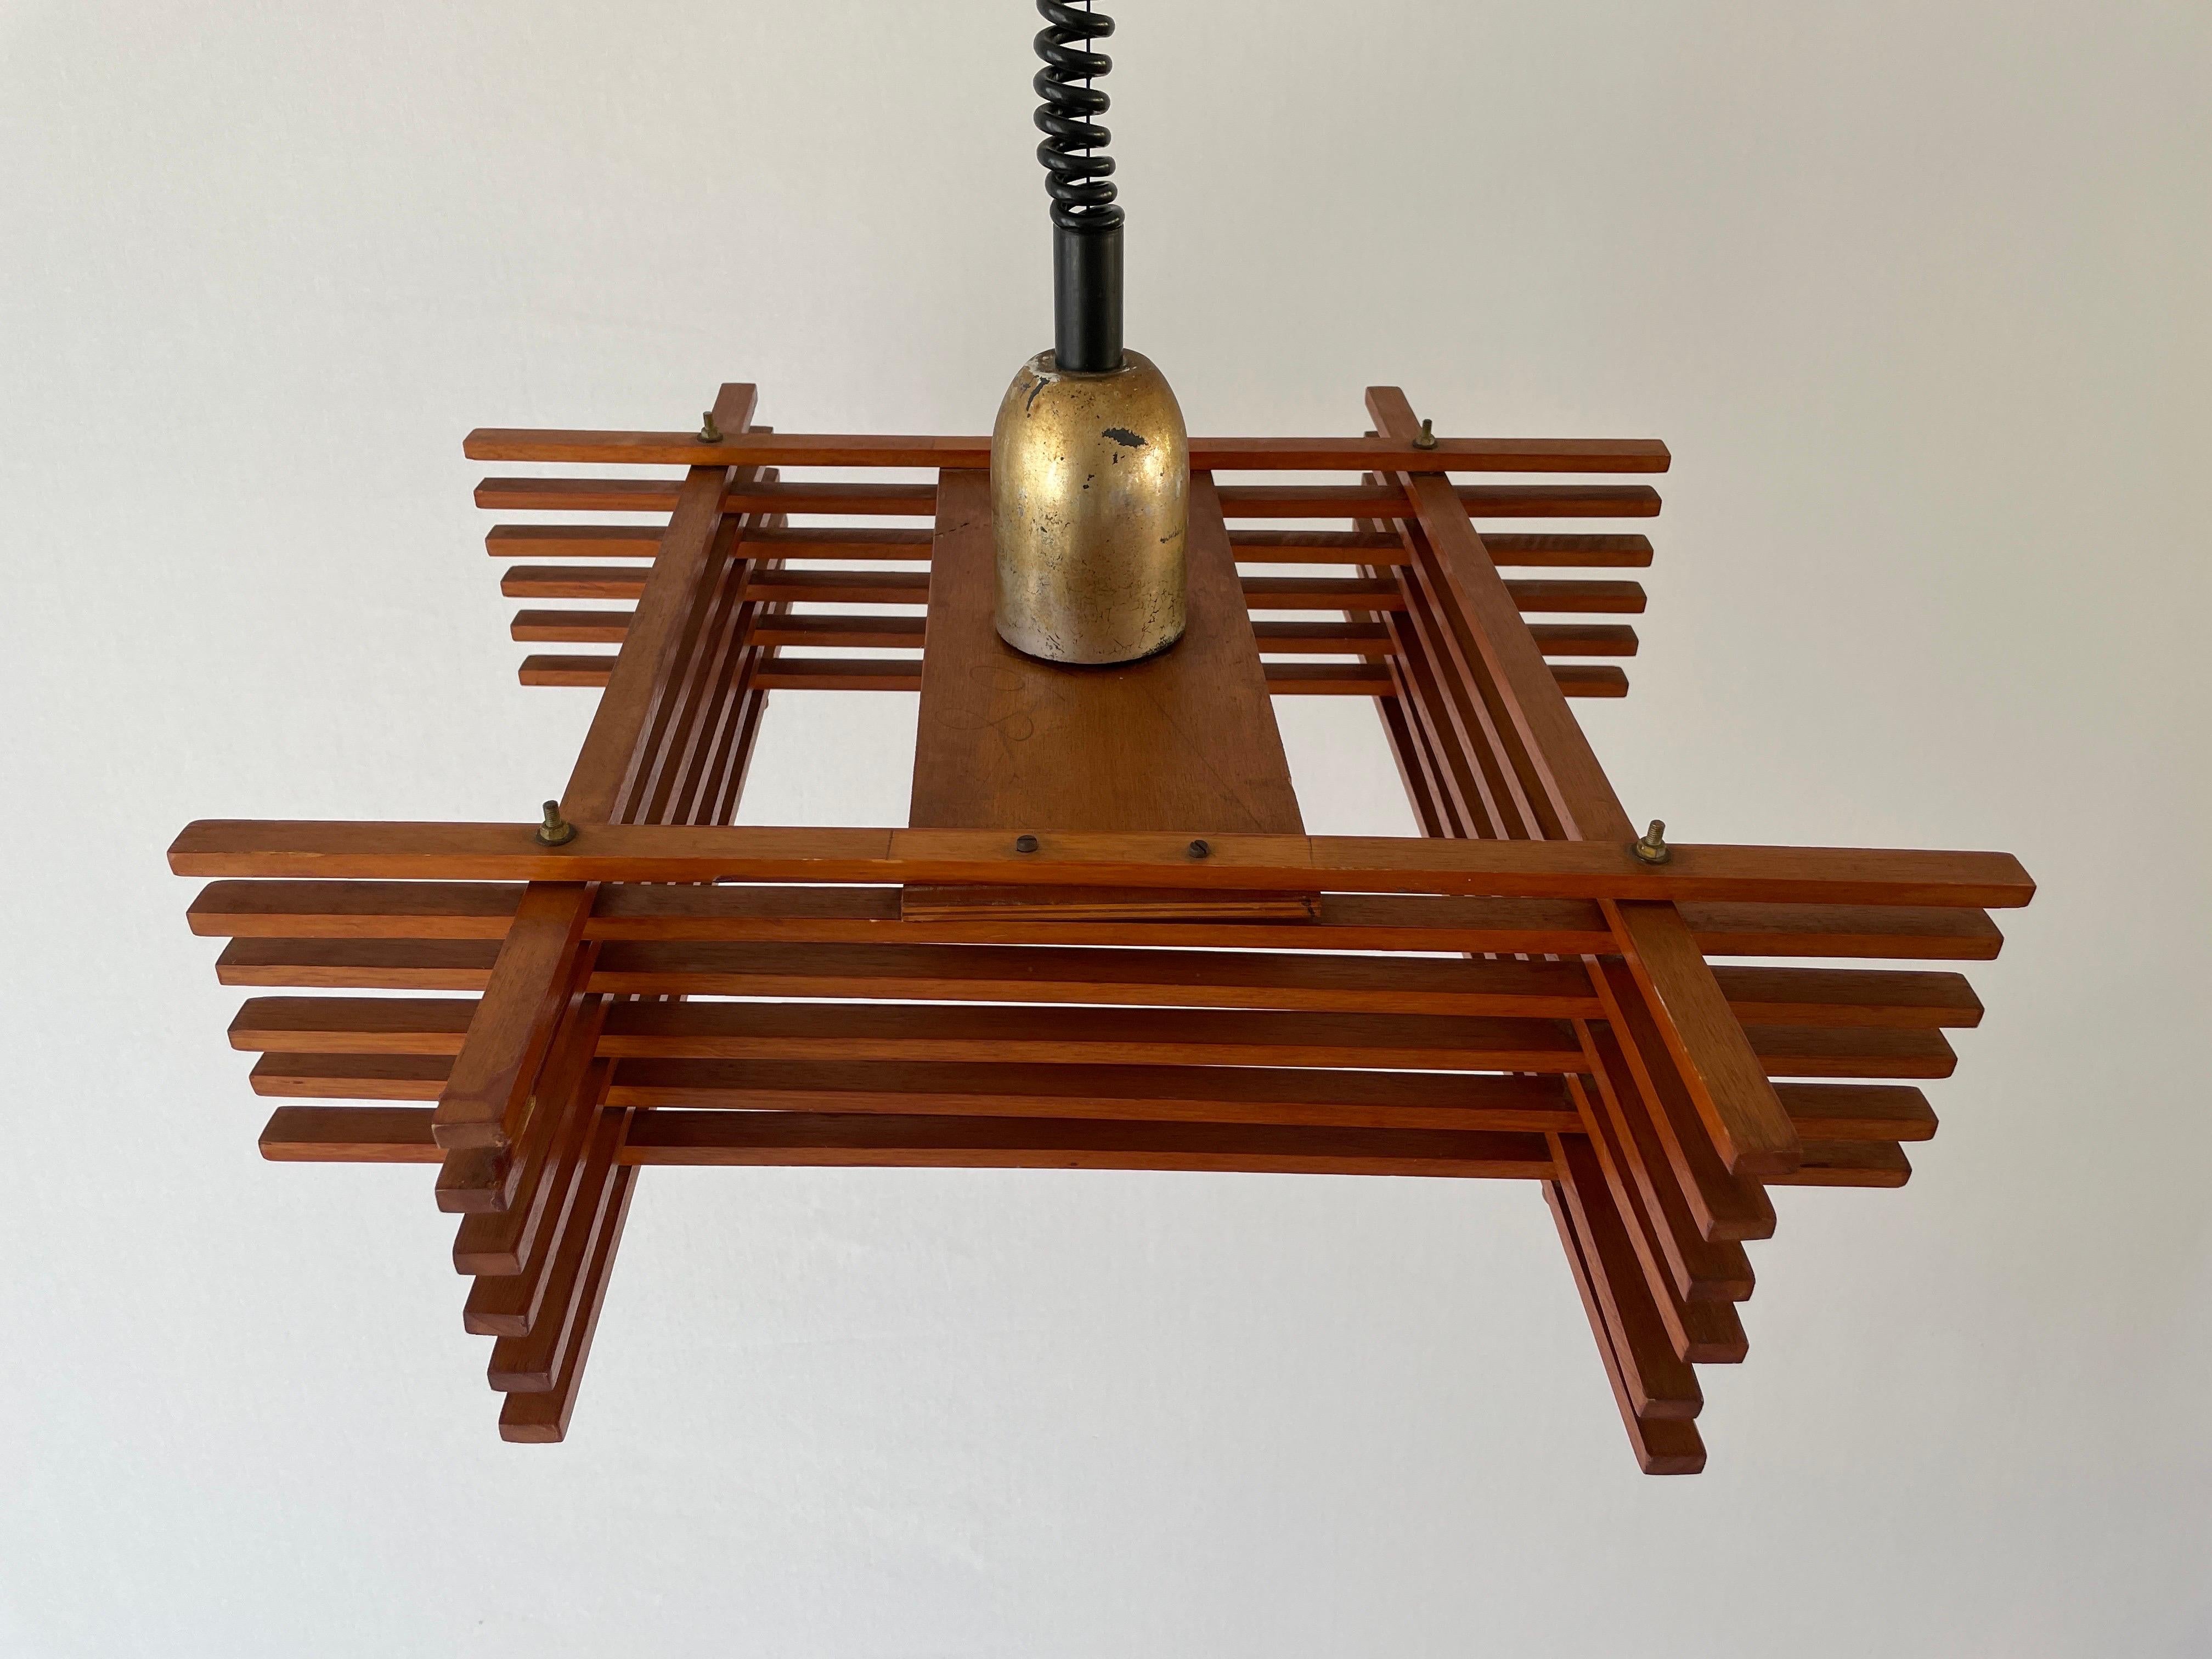 Mid Century Modern Adjustable Wood Large Ceiling Lamp by Esperia, 1960s, Italy

This lamp works with E27 light bulbs.

Measurements: 
Shade: 60 cm x 60 cm x 17 cm
Height adjustable between 72 - 167 cm


